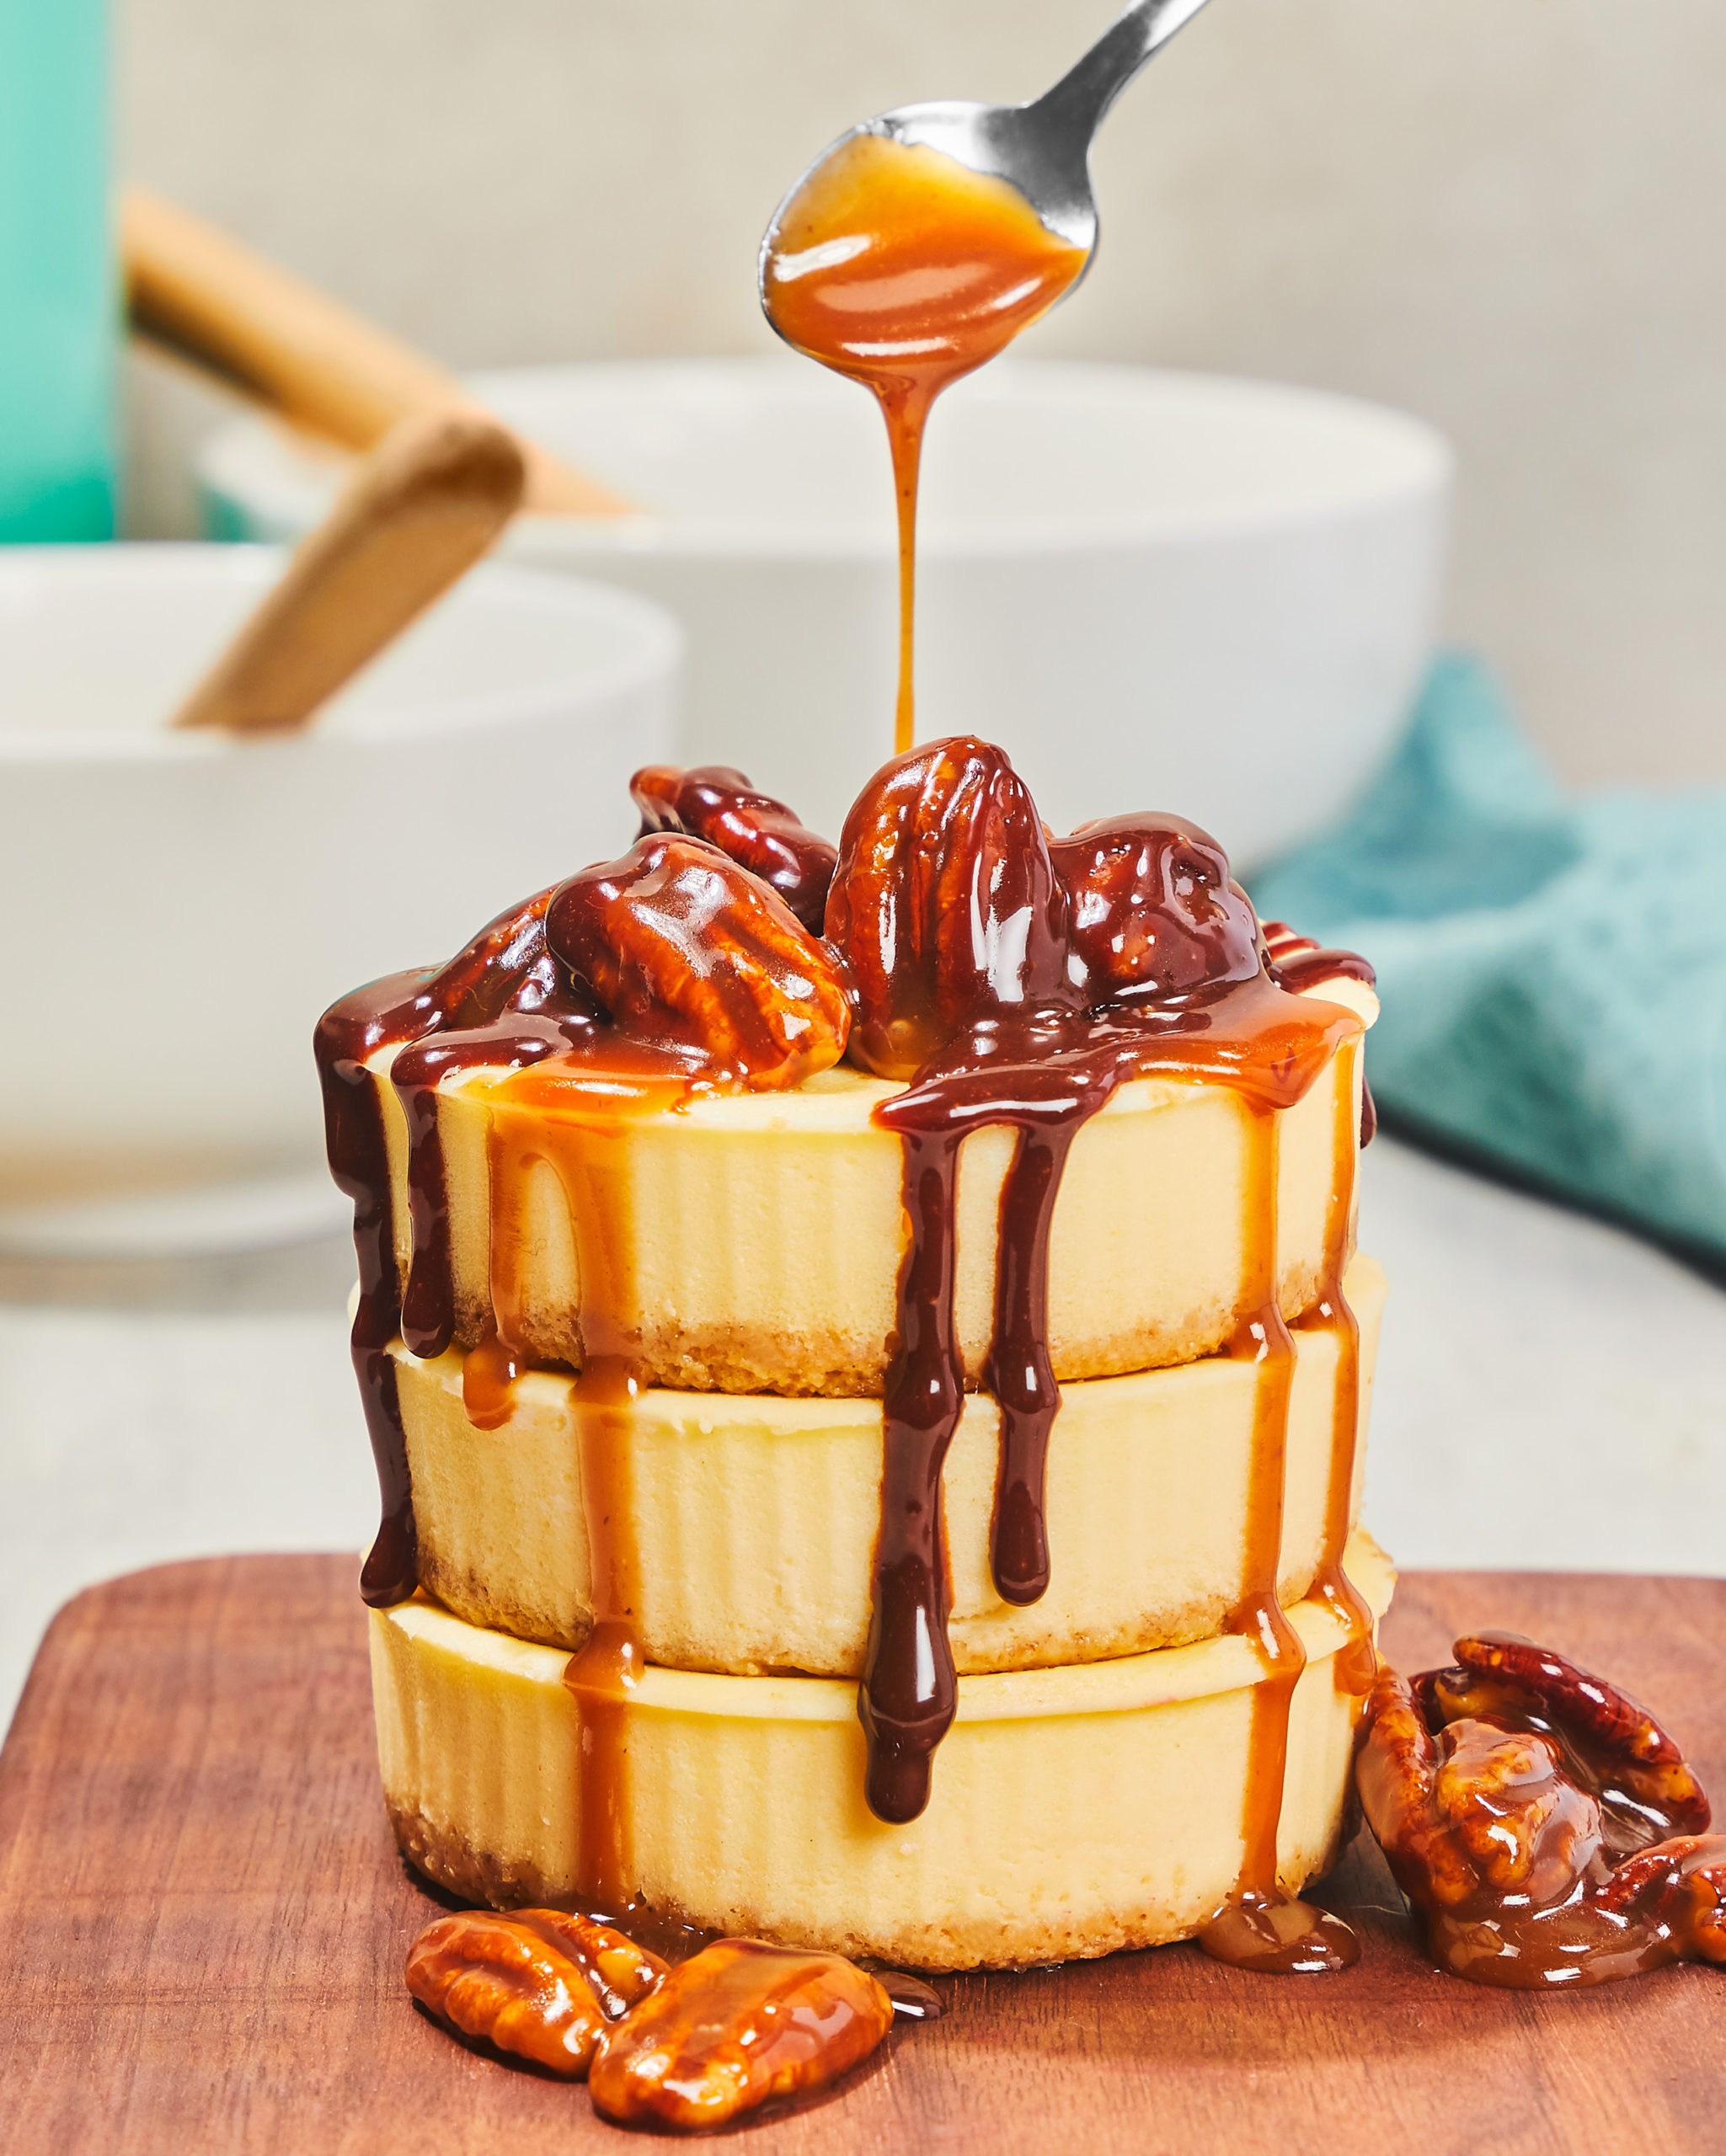 Mini cheesecakes drizzled with caramel and pecans